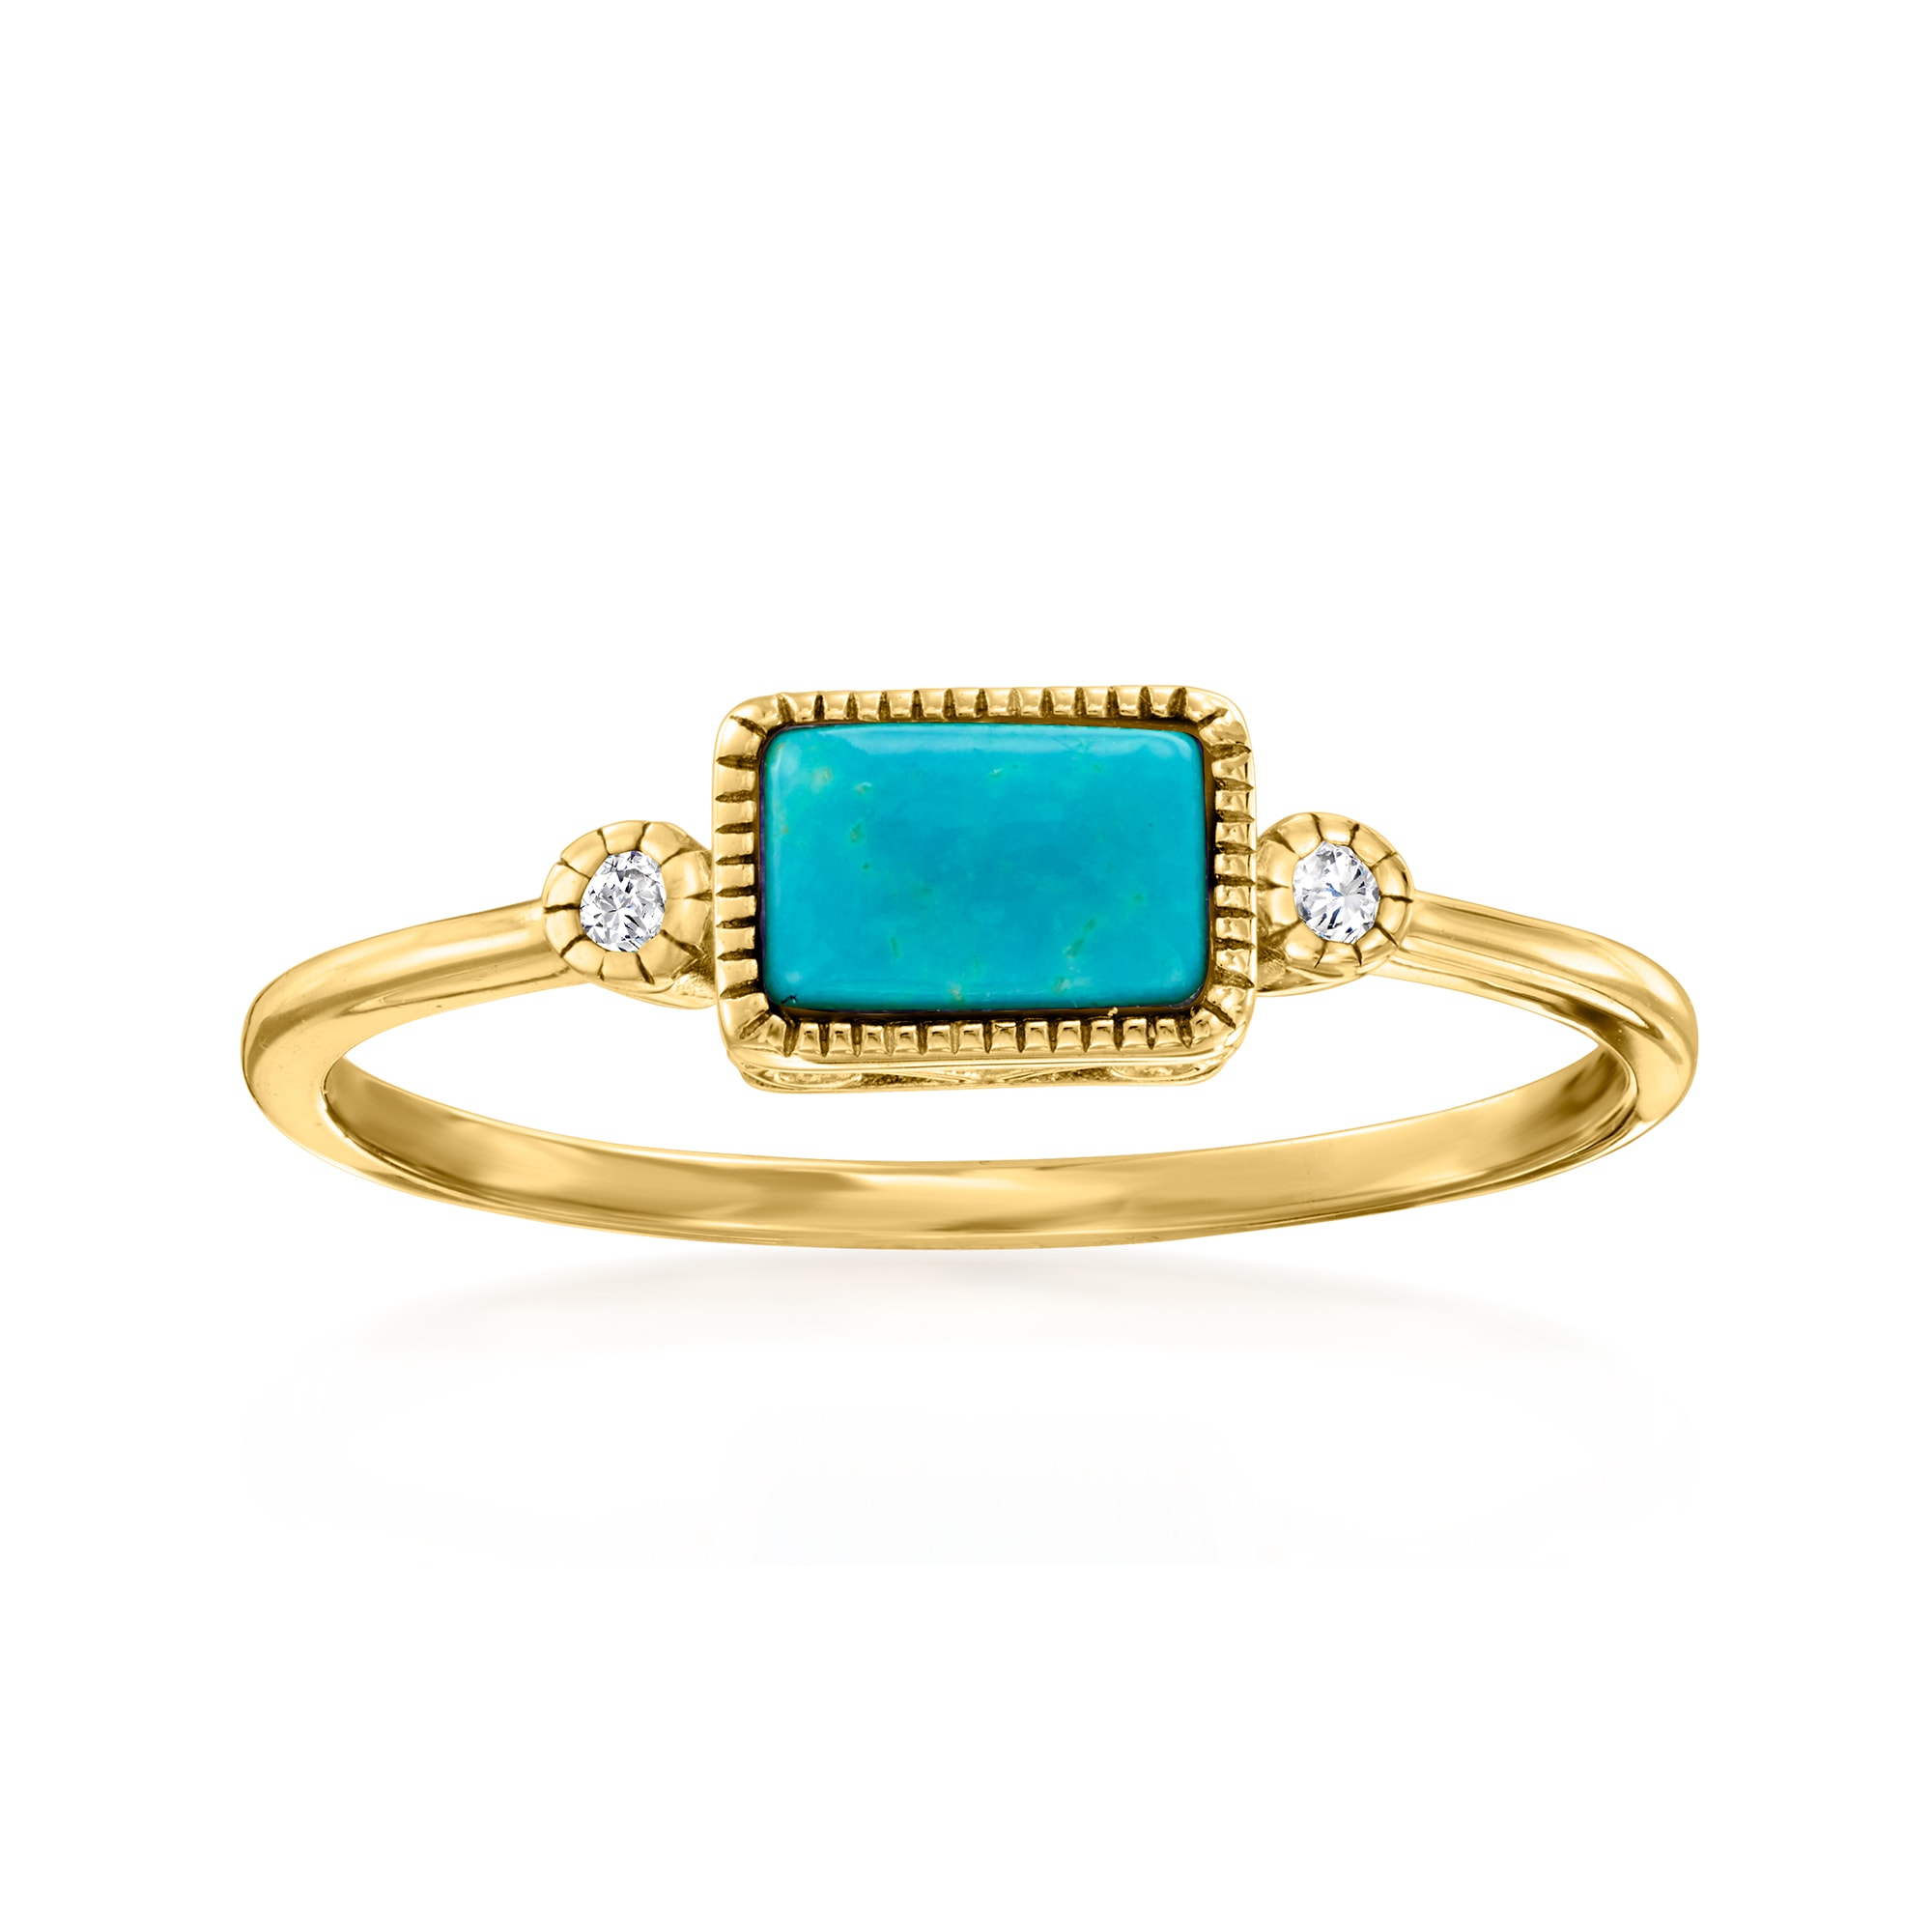 RAYA RING GUARD - TURQUOISE RING GUARD WITH DIAMOND ACCENTS